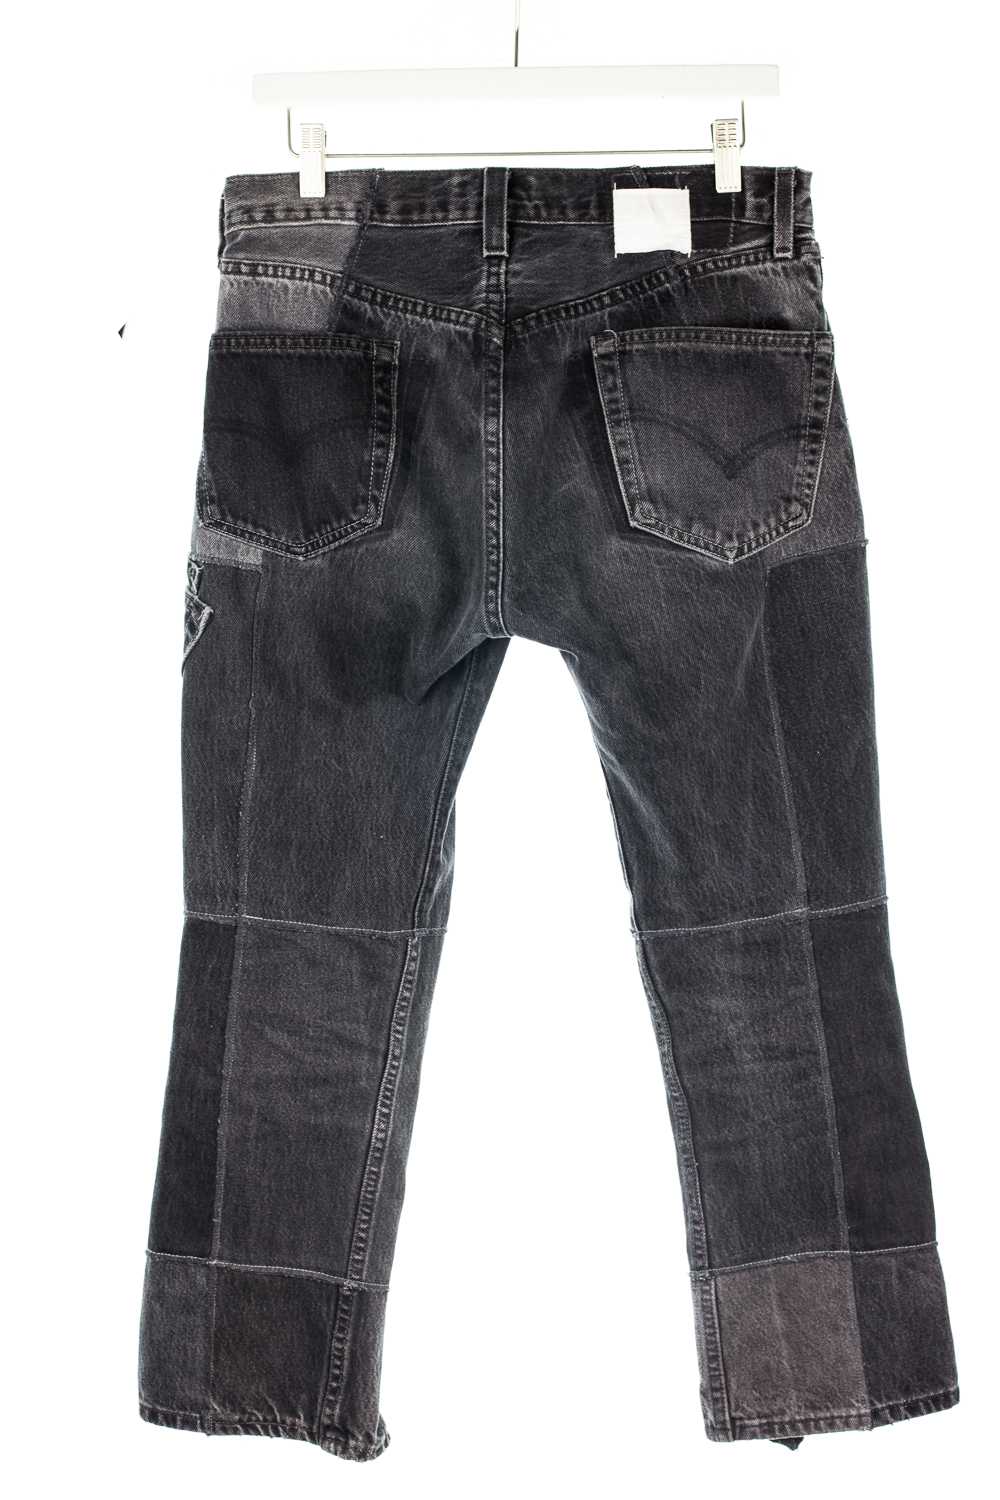 “The Jean” Reconstructed Patchwork Denim (Grey) - image 2